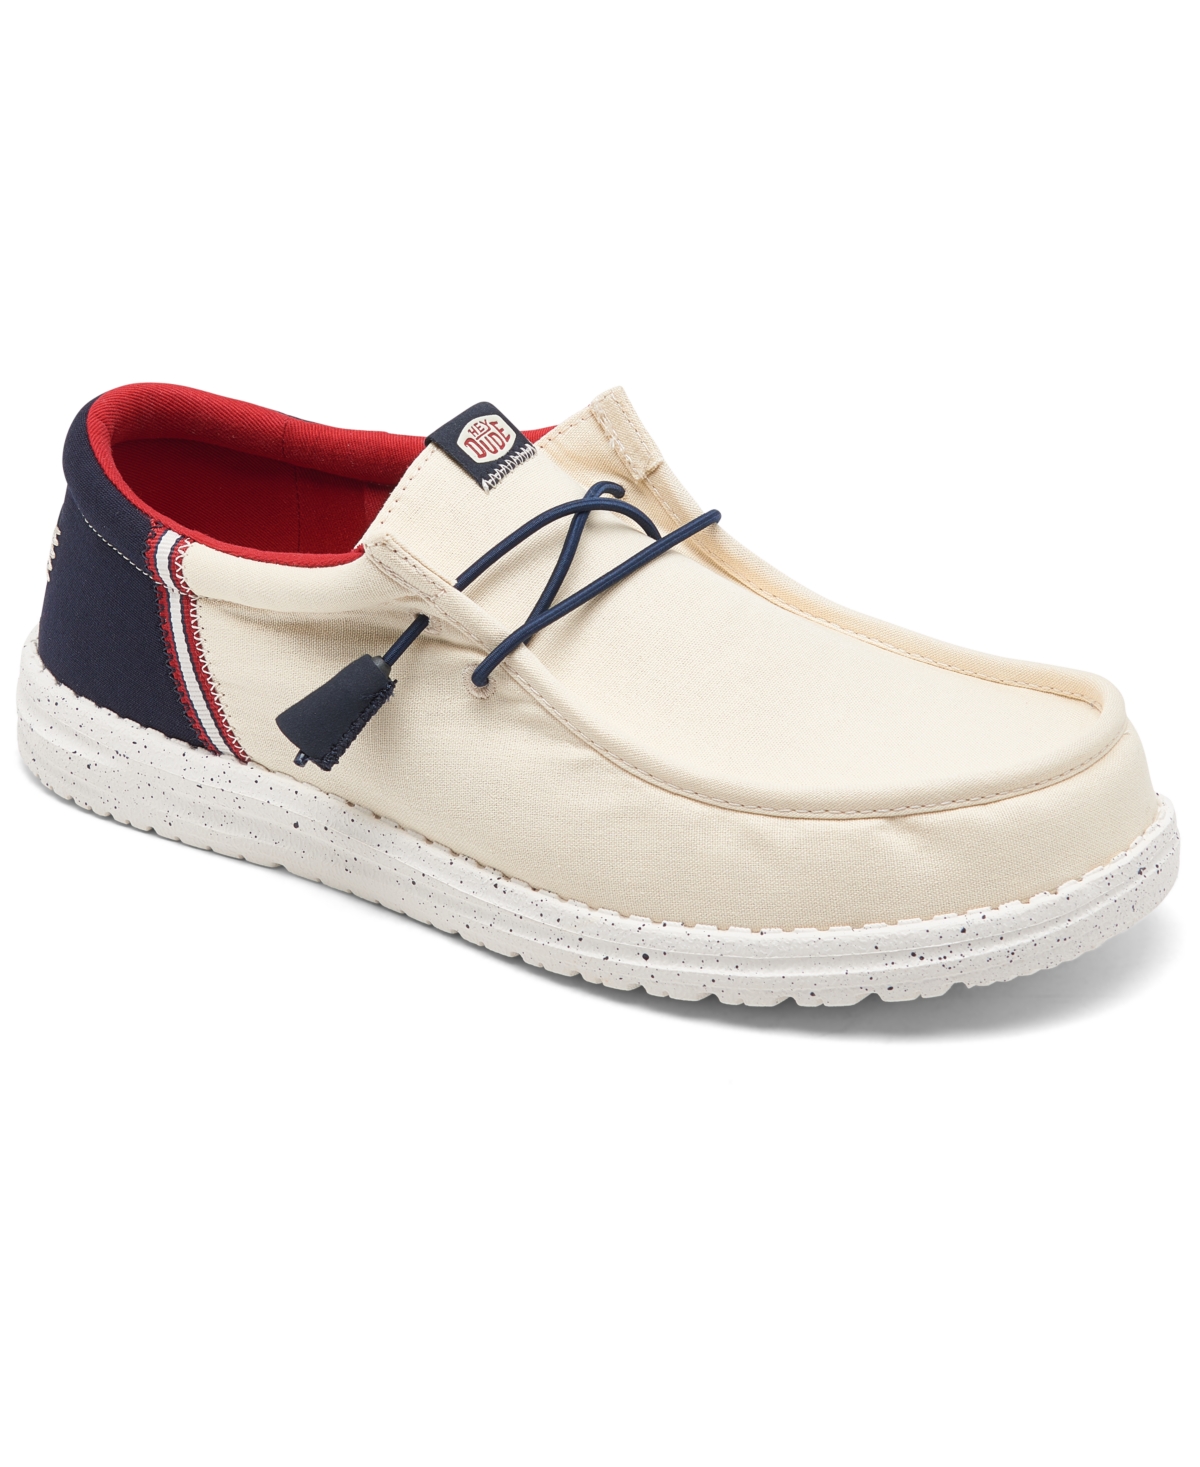 Men's Wally Funk Americana Casual Moccasin Sneakers from Finish Line - OFF WHITE/NAVY/RED